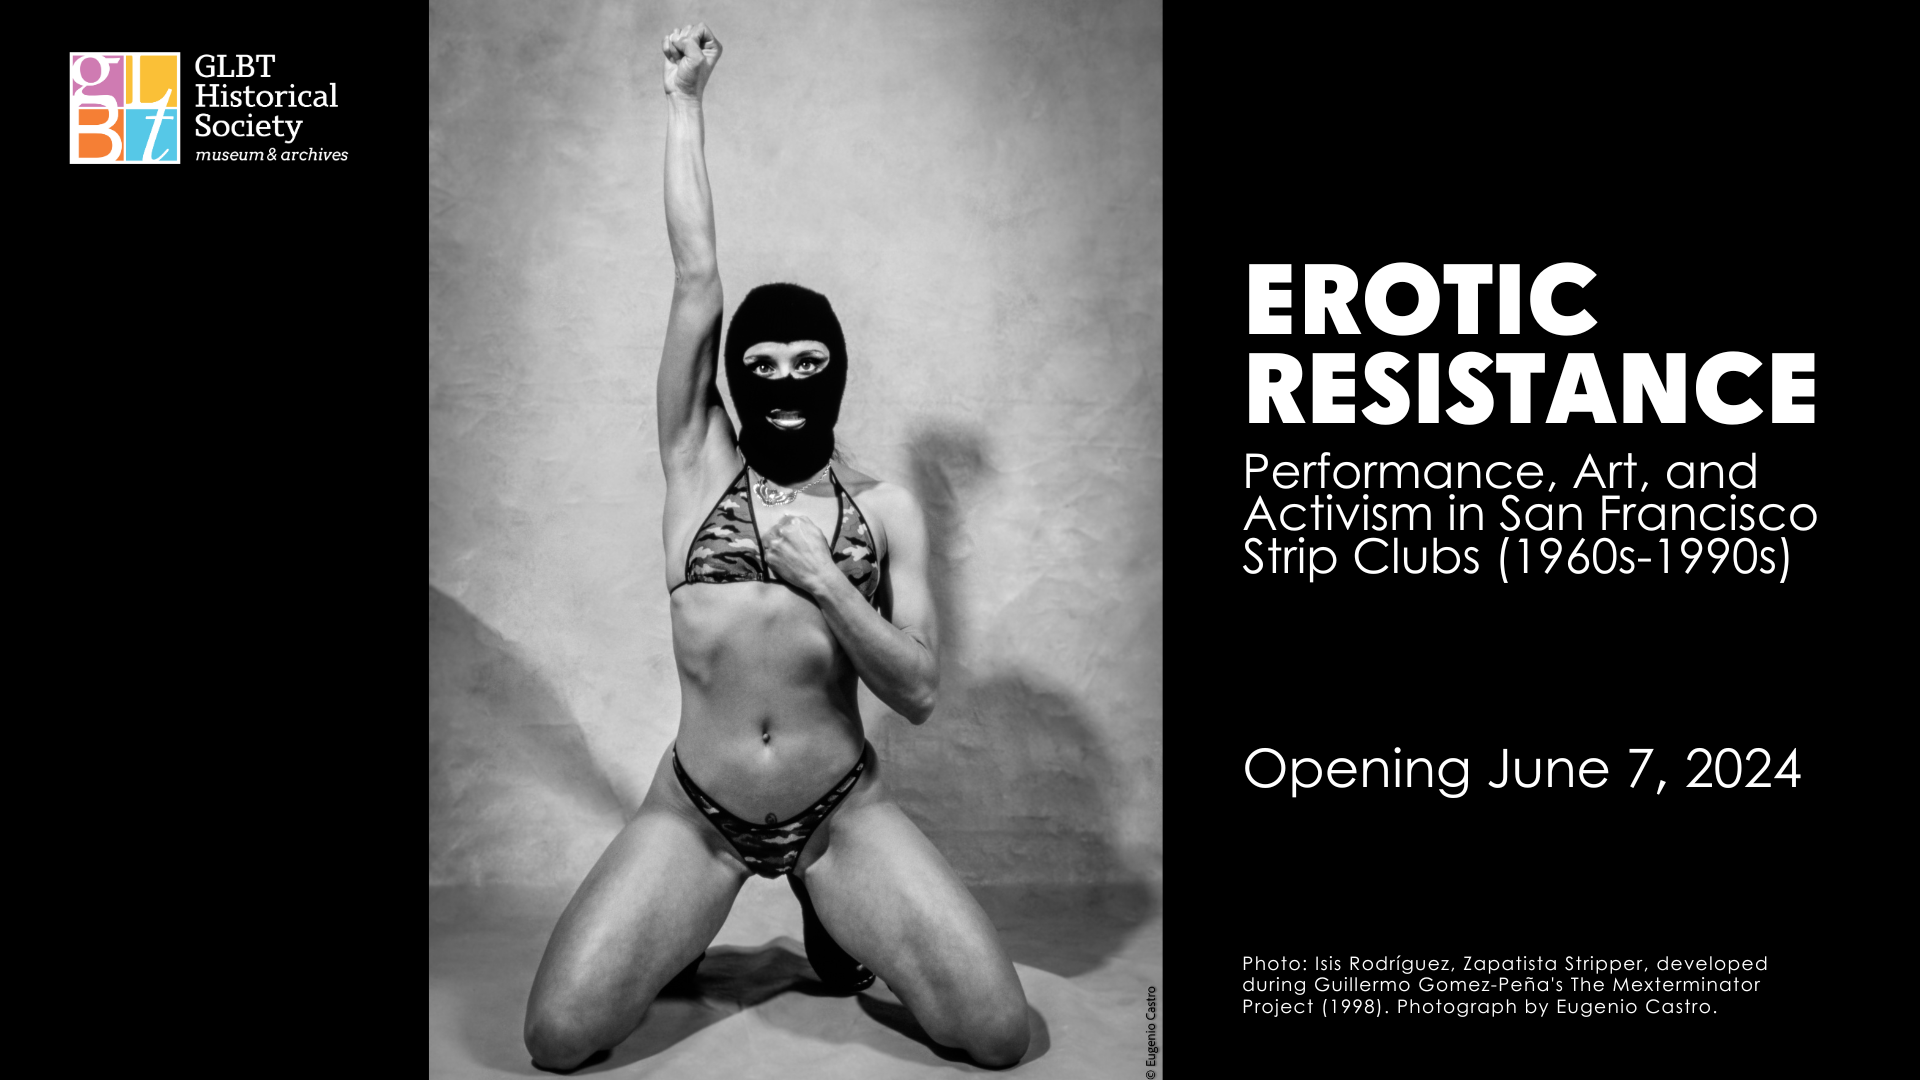 Erotic Resistance: Performance, Art, and Activism in San Francisco Strip Clubs (1960s-1990s)